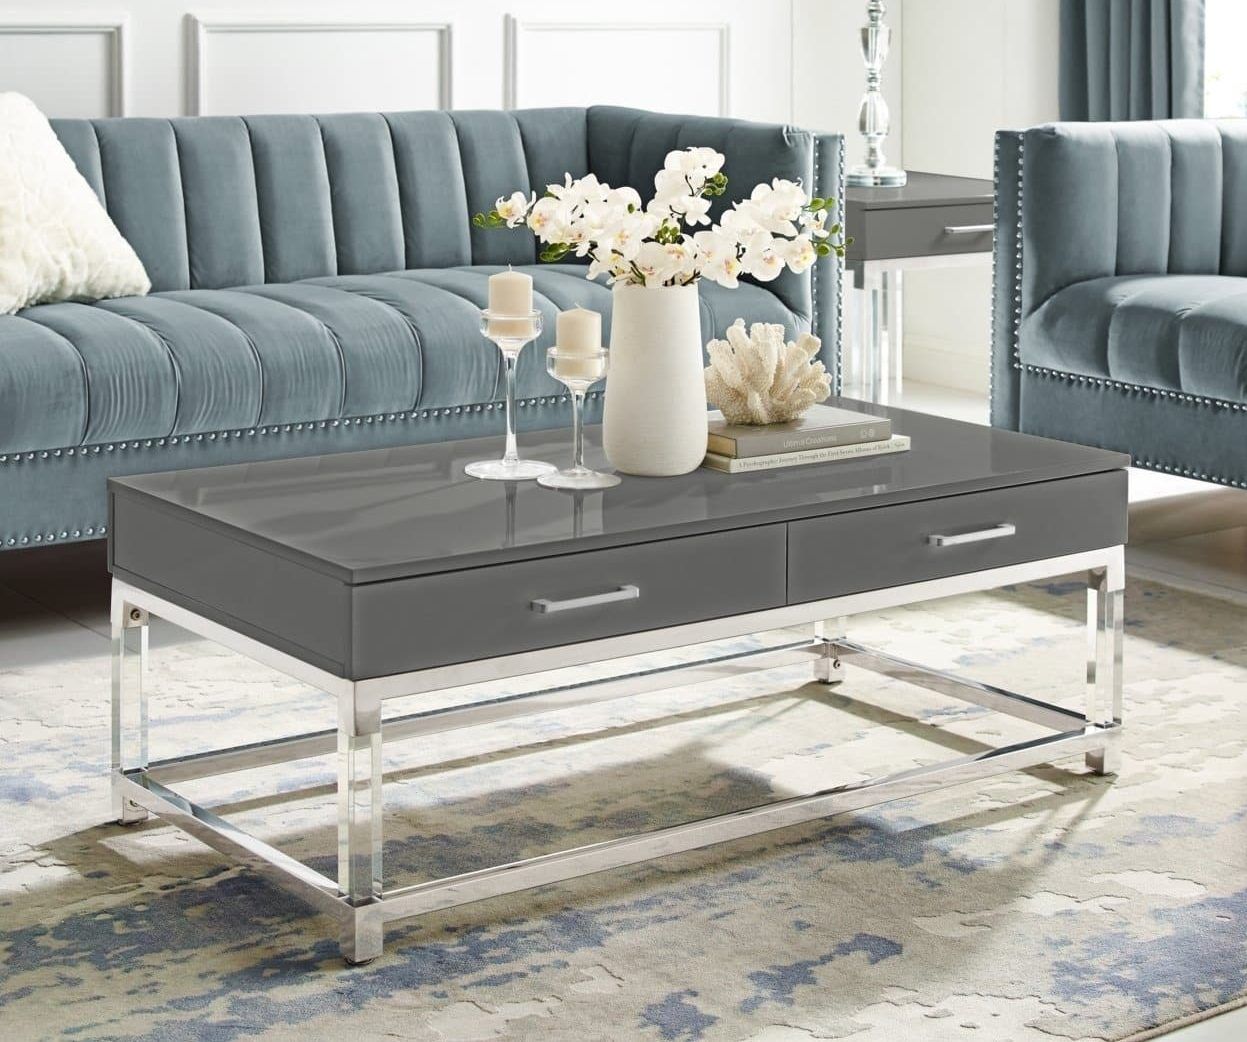 21 Lucite Coffee Tables To Liven Your Living Room – Acrylic & See Through With Regard To Acrylic Coffee Tables (Gallery 20 of 20)